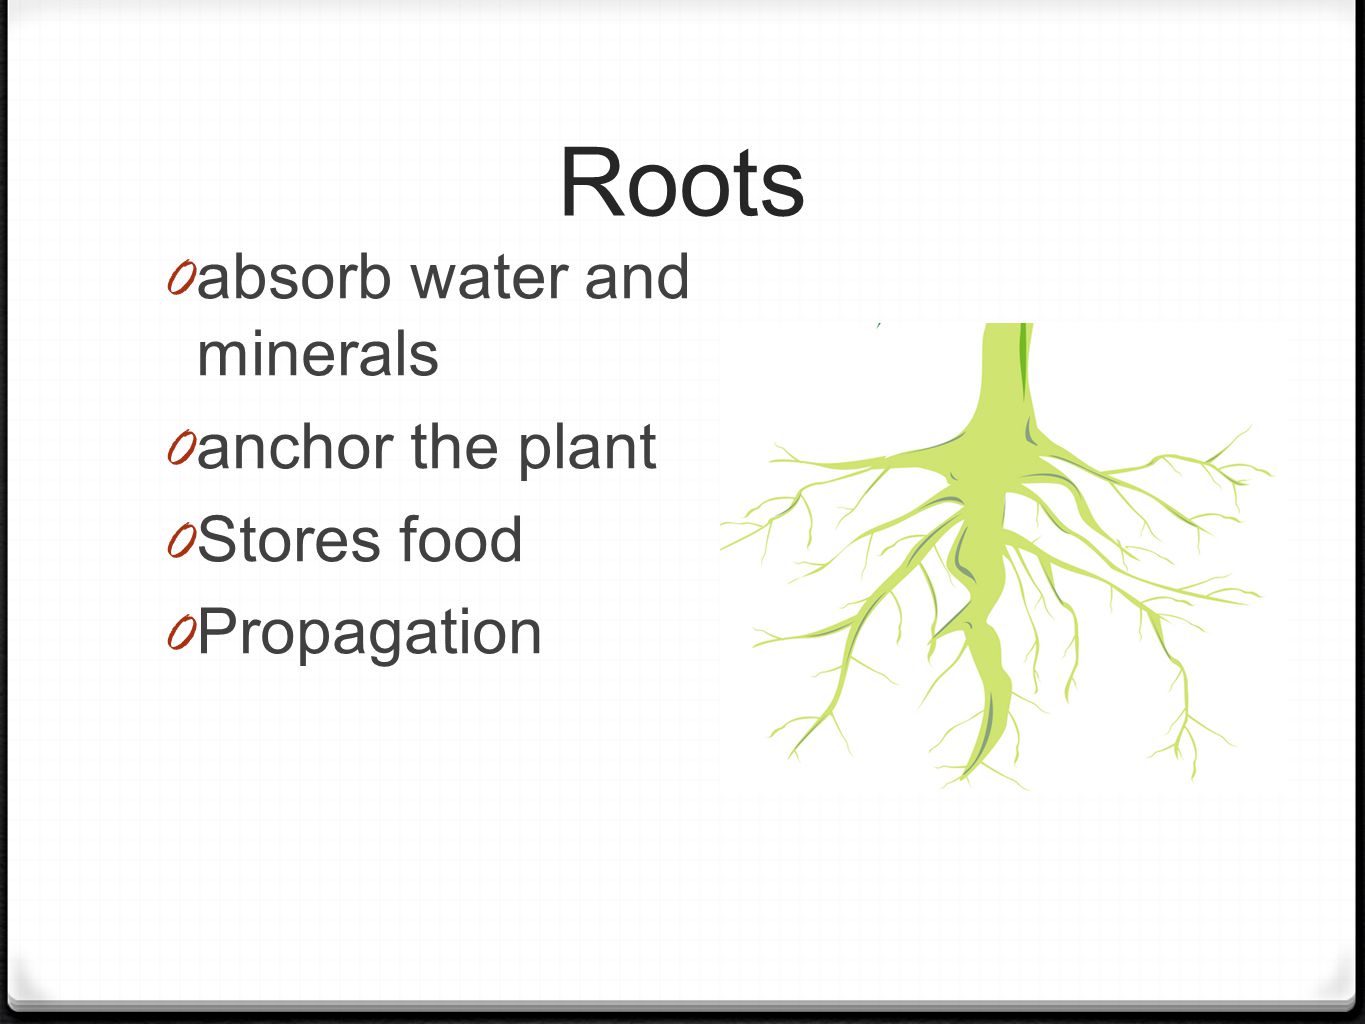 Roots 0 absorb water and minerals 0 anchor the plant 0 Stores food 0 Propagation